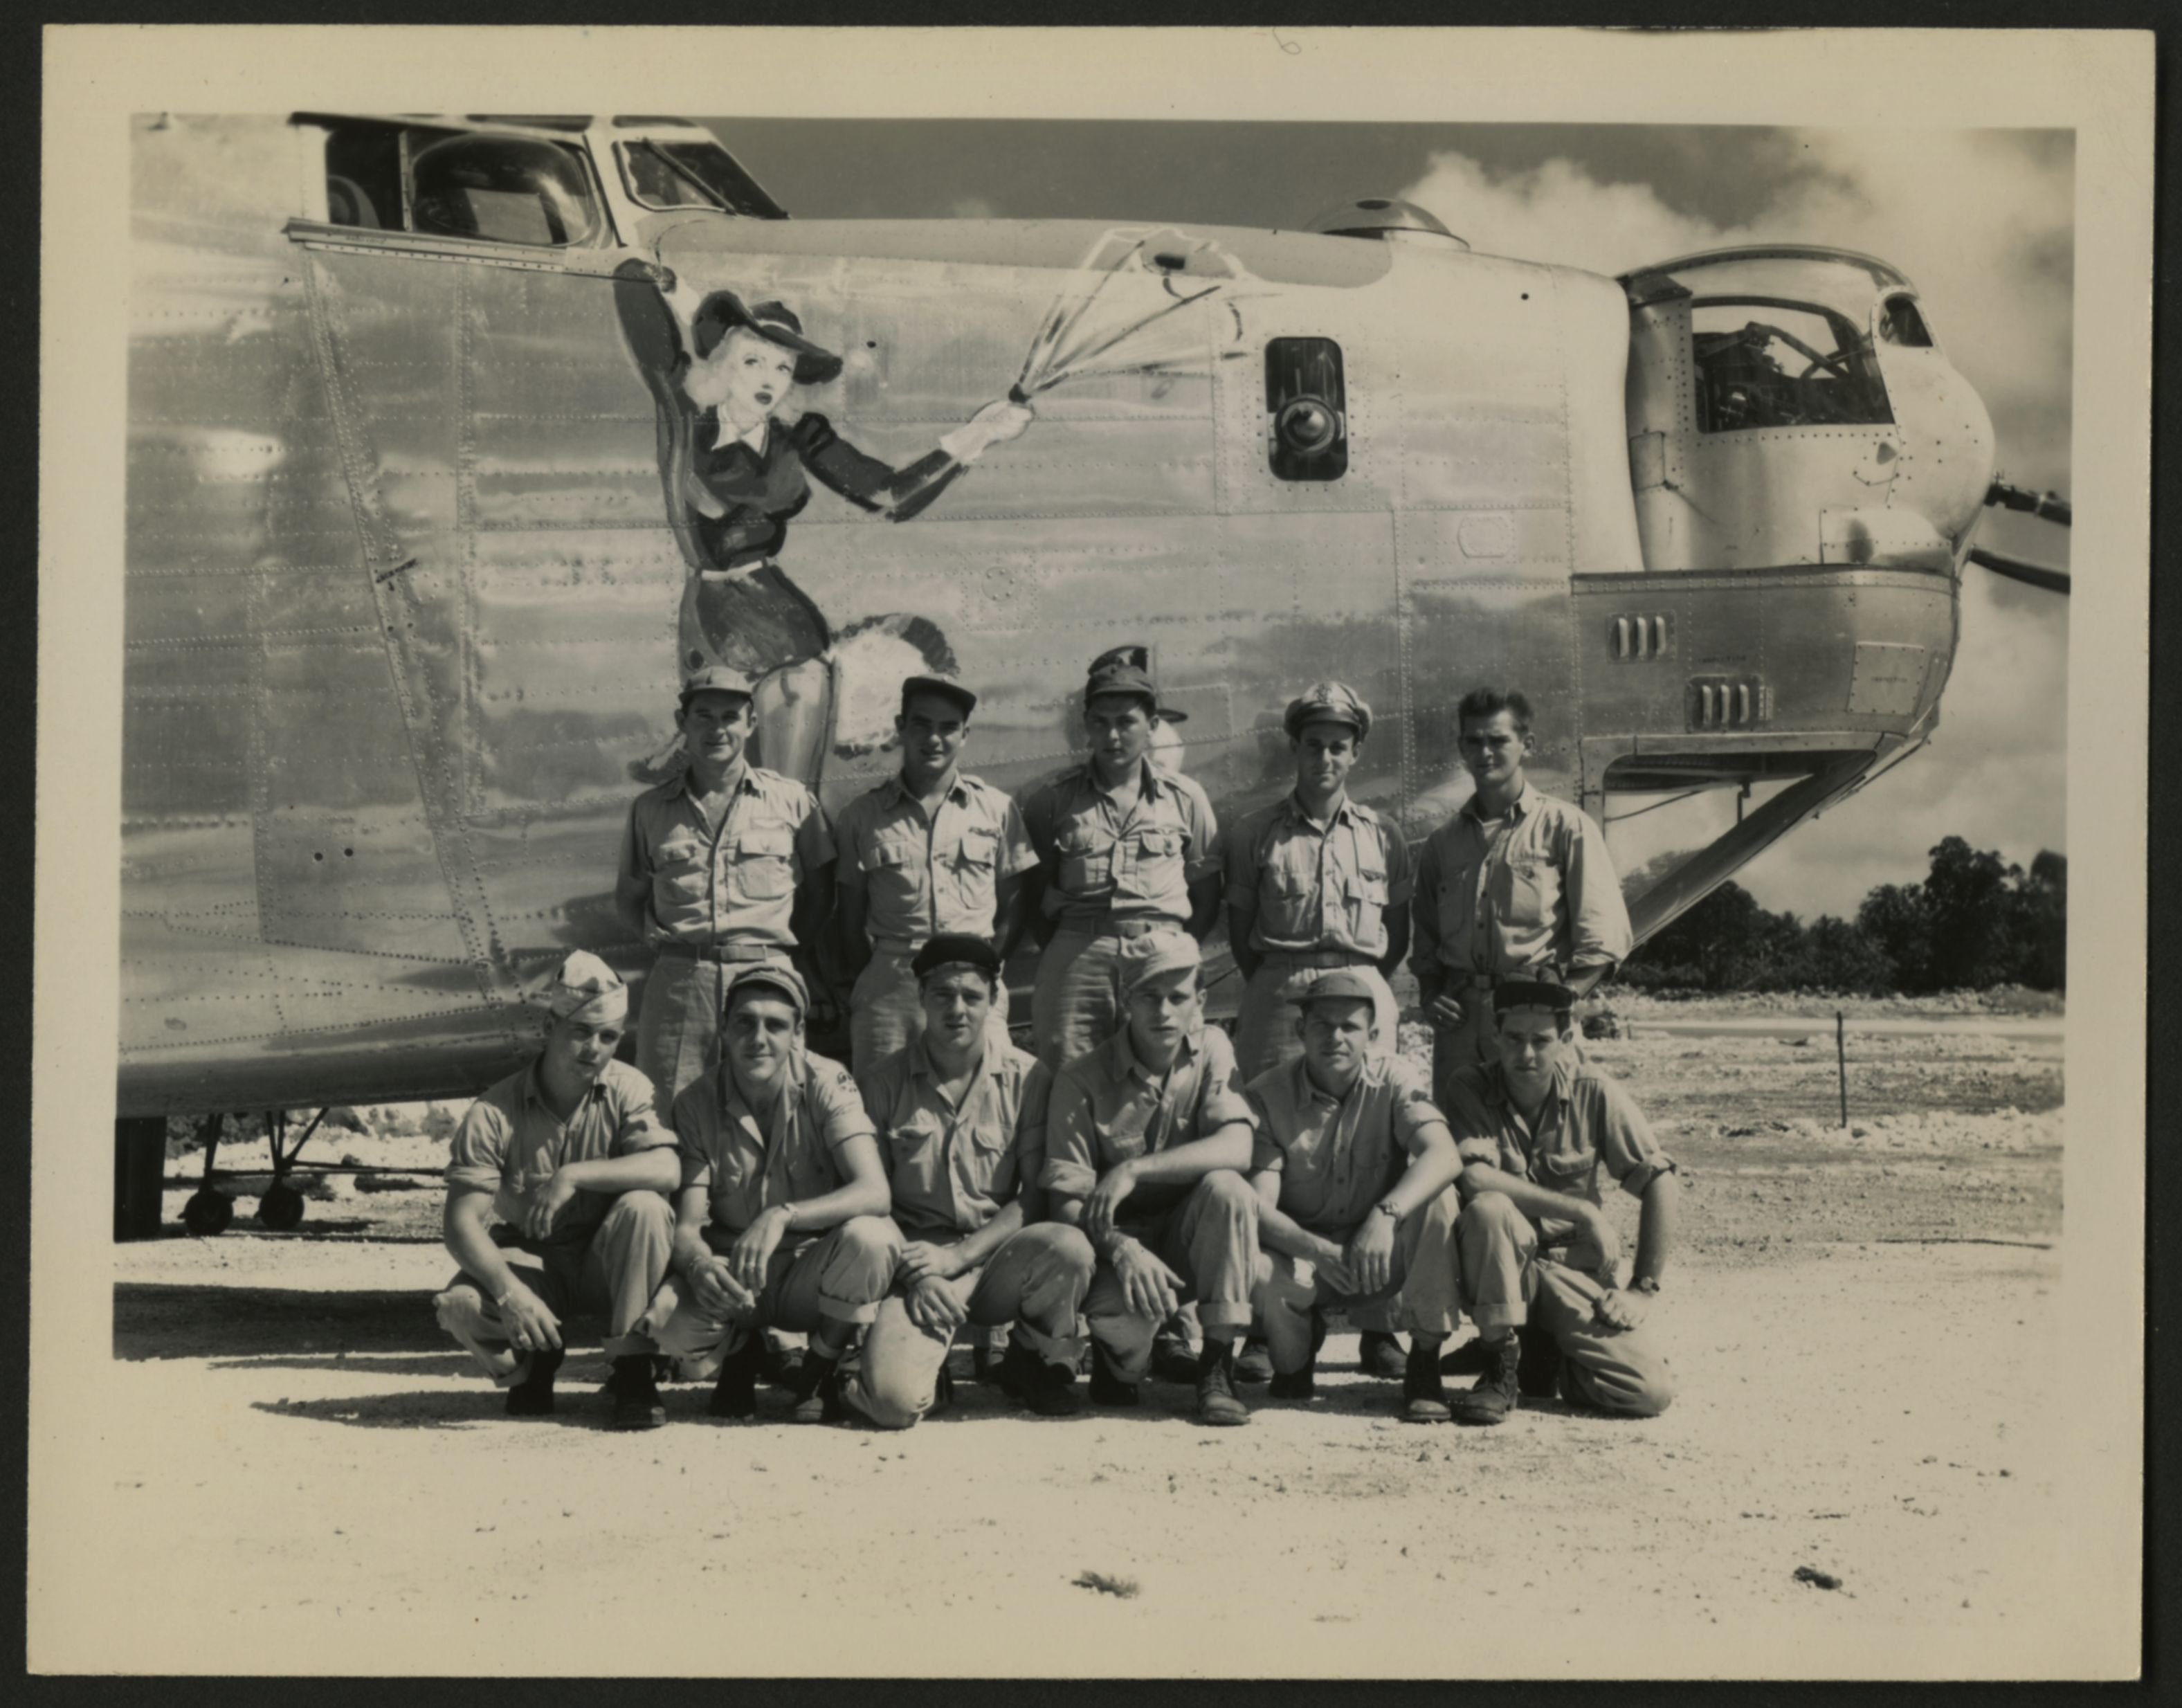 Robert L. Stone’s crew in front of the Flying Jenny, Guam, 1945